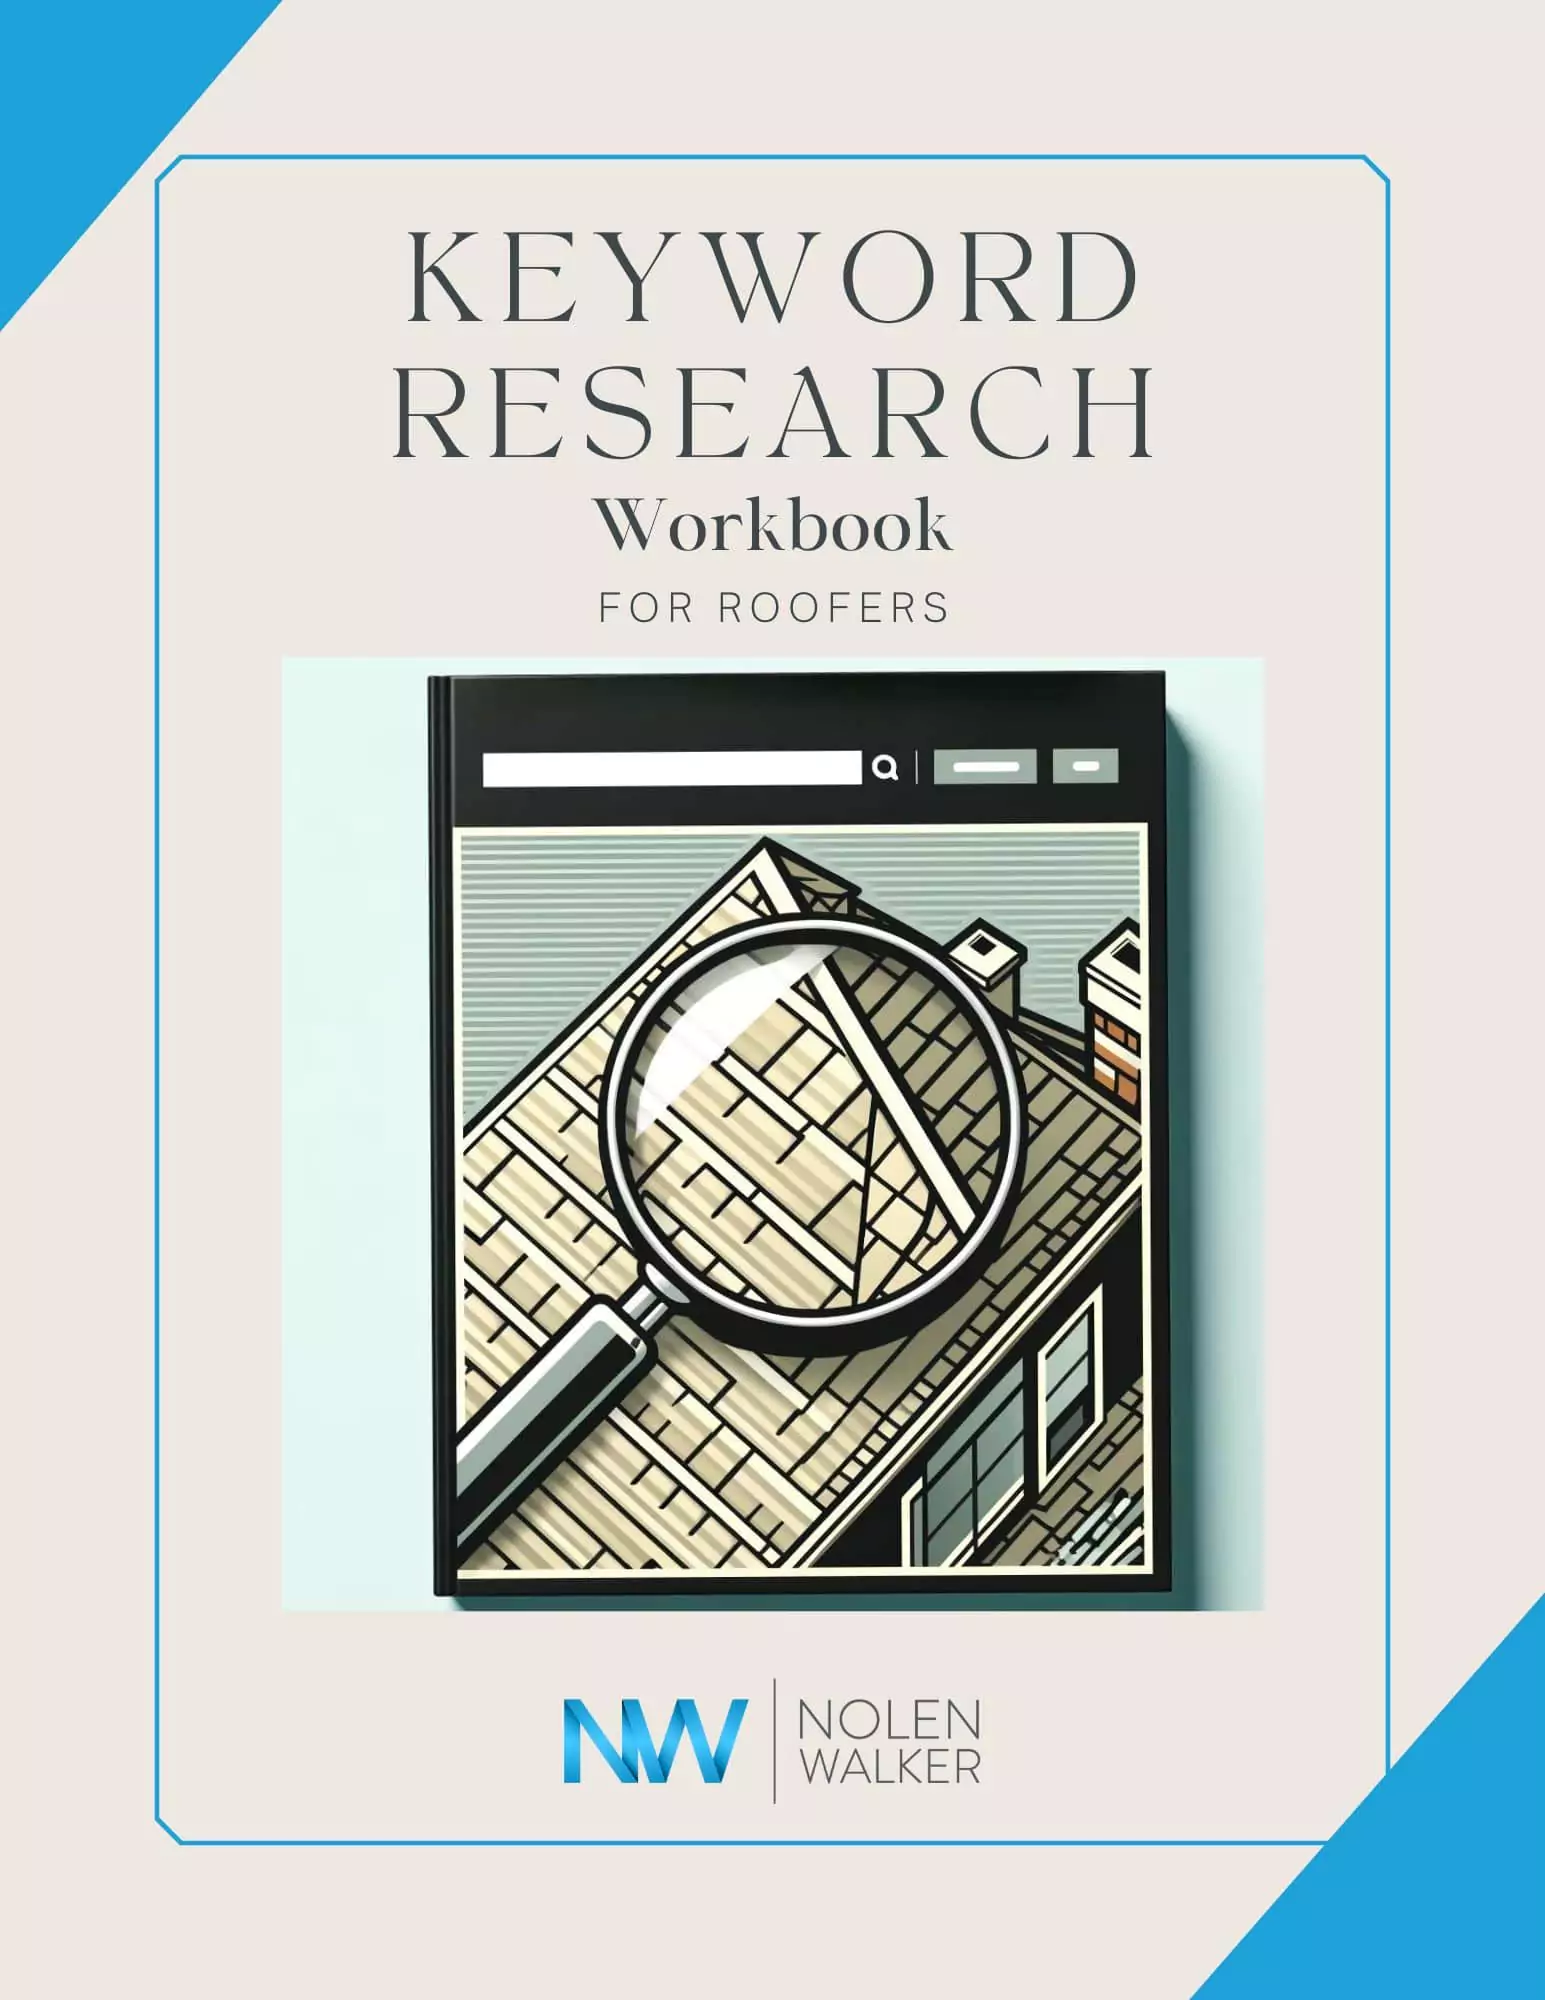 The Keyword Handbook Research for Roofers